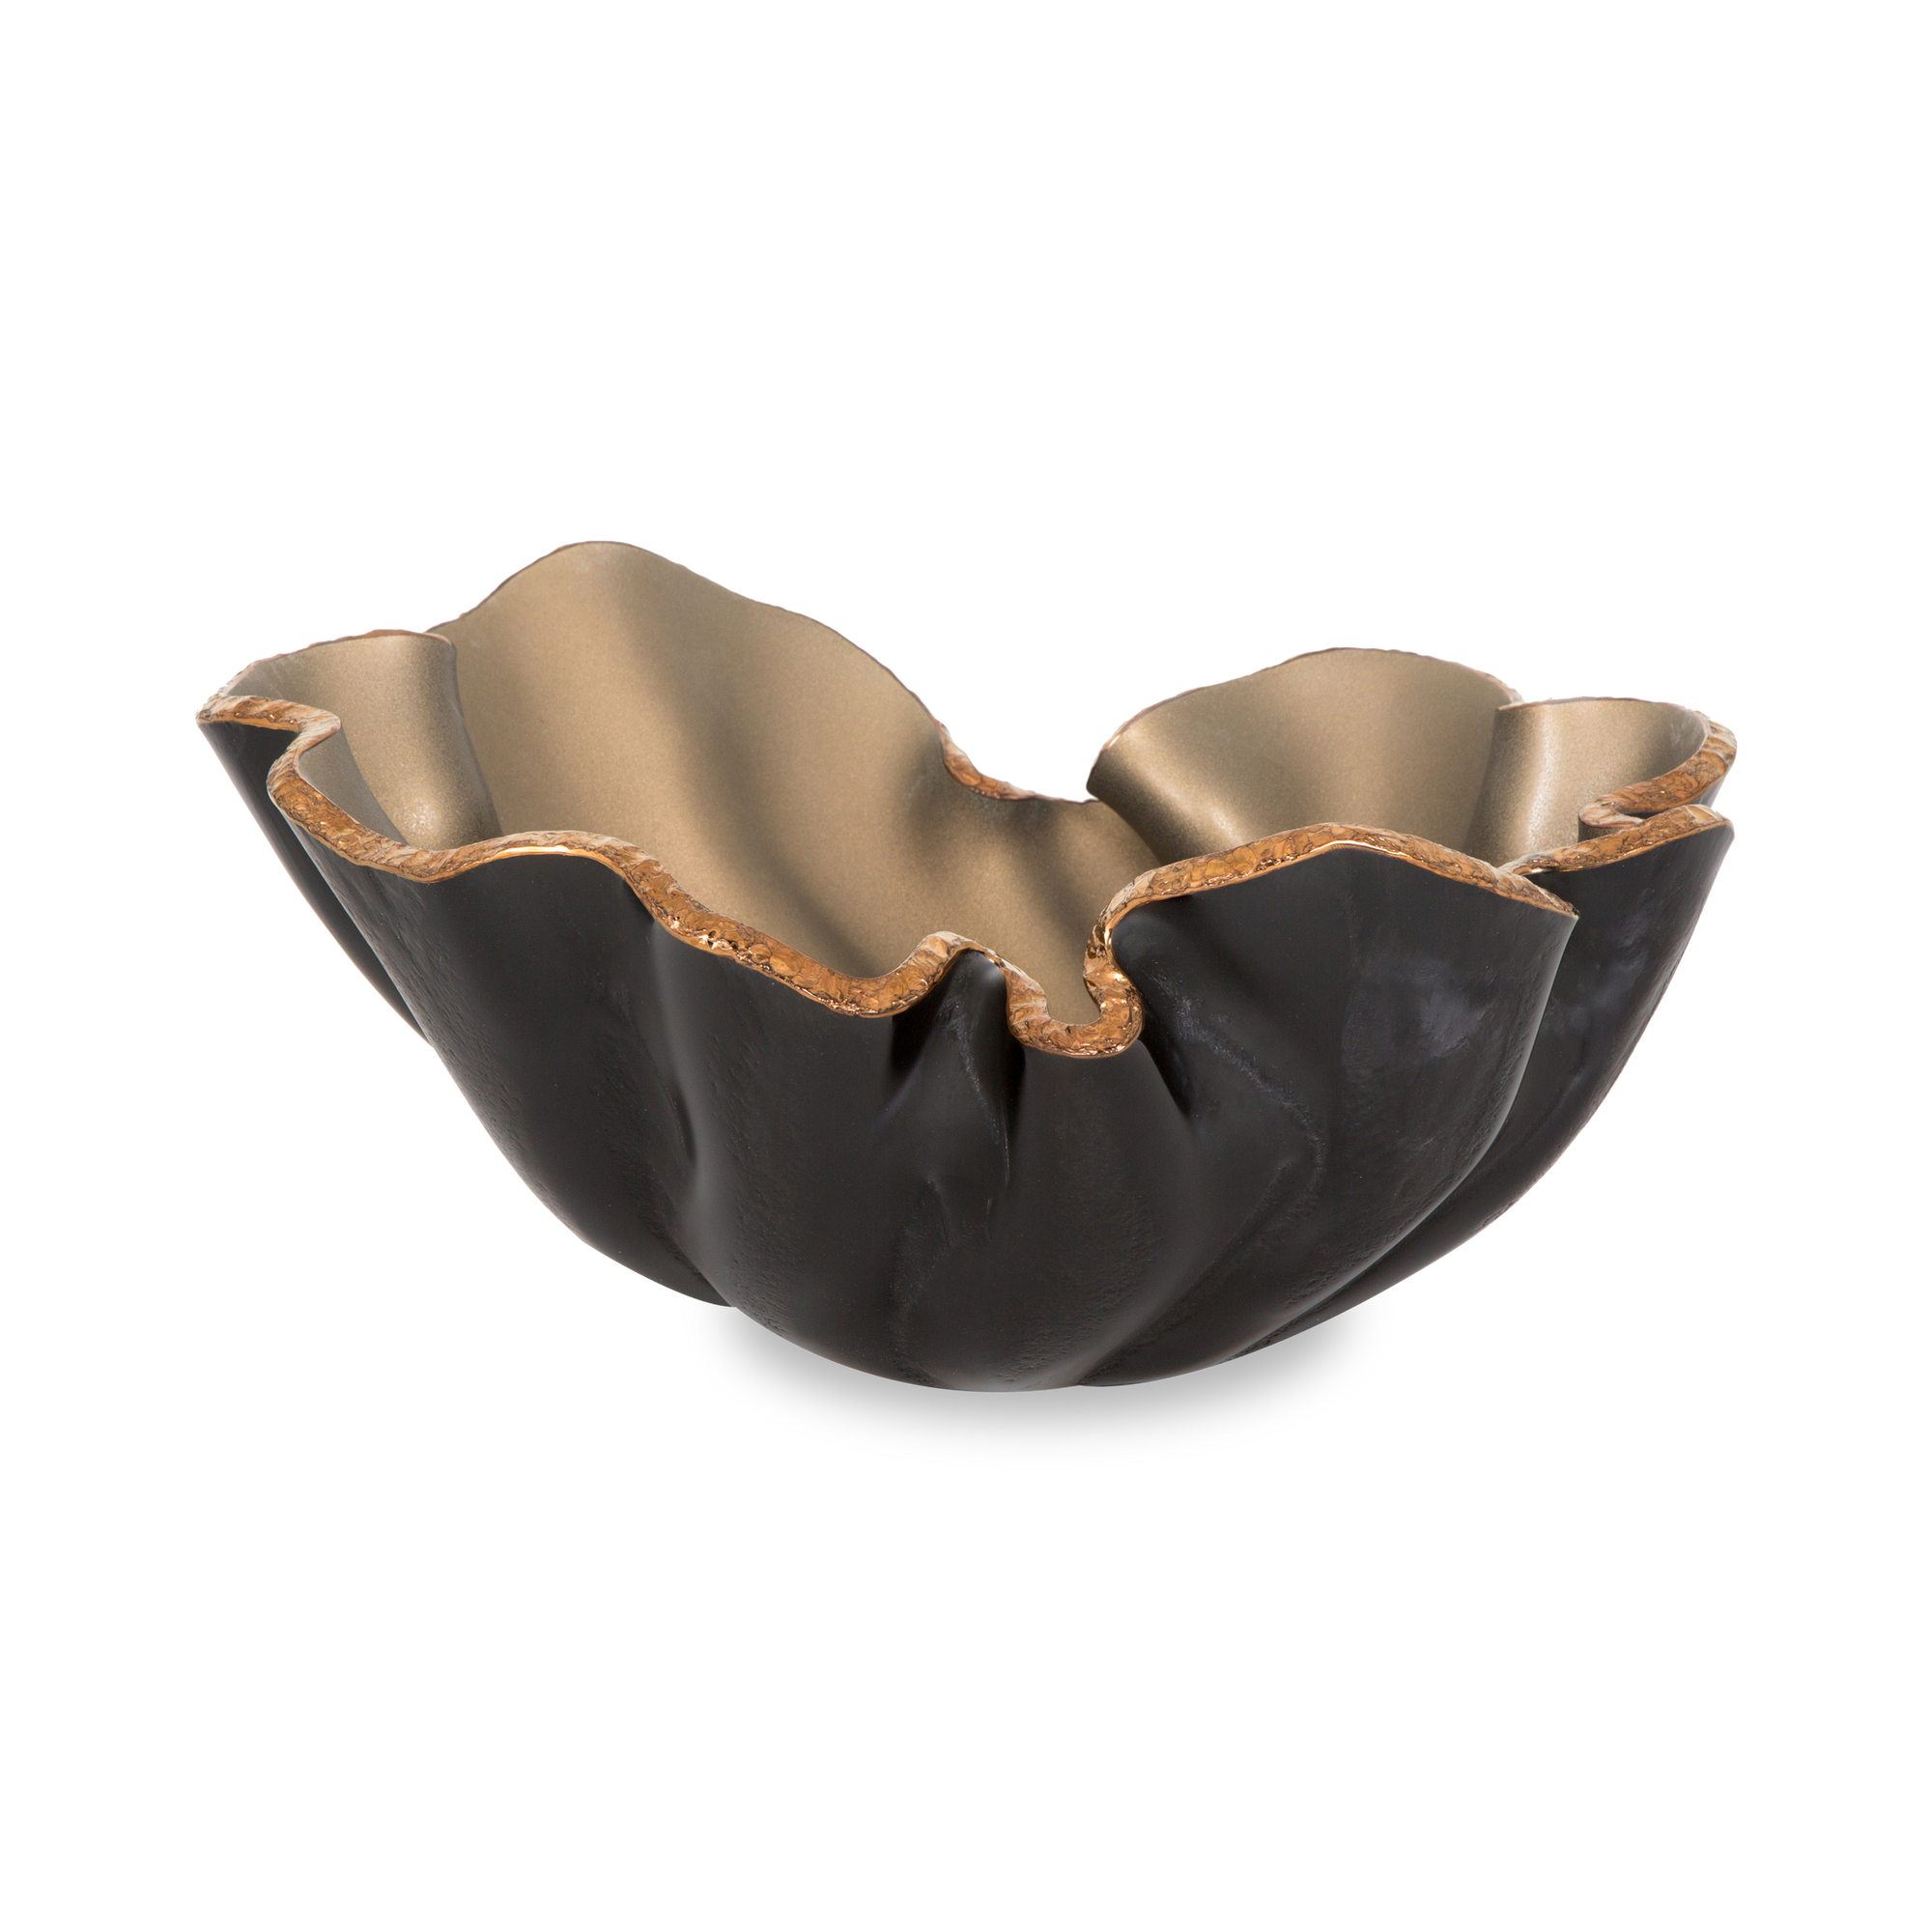 Handmade in Brazil, this elegant glass bowl colored with mica minerals and gold components.